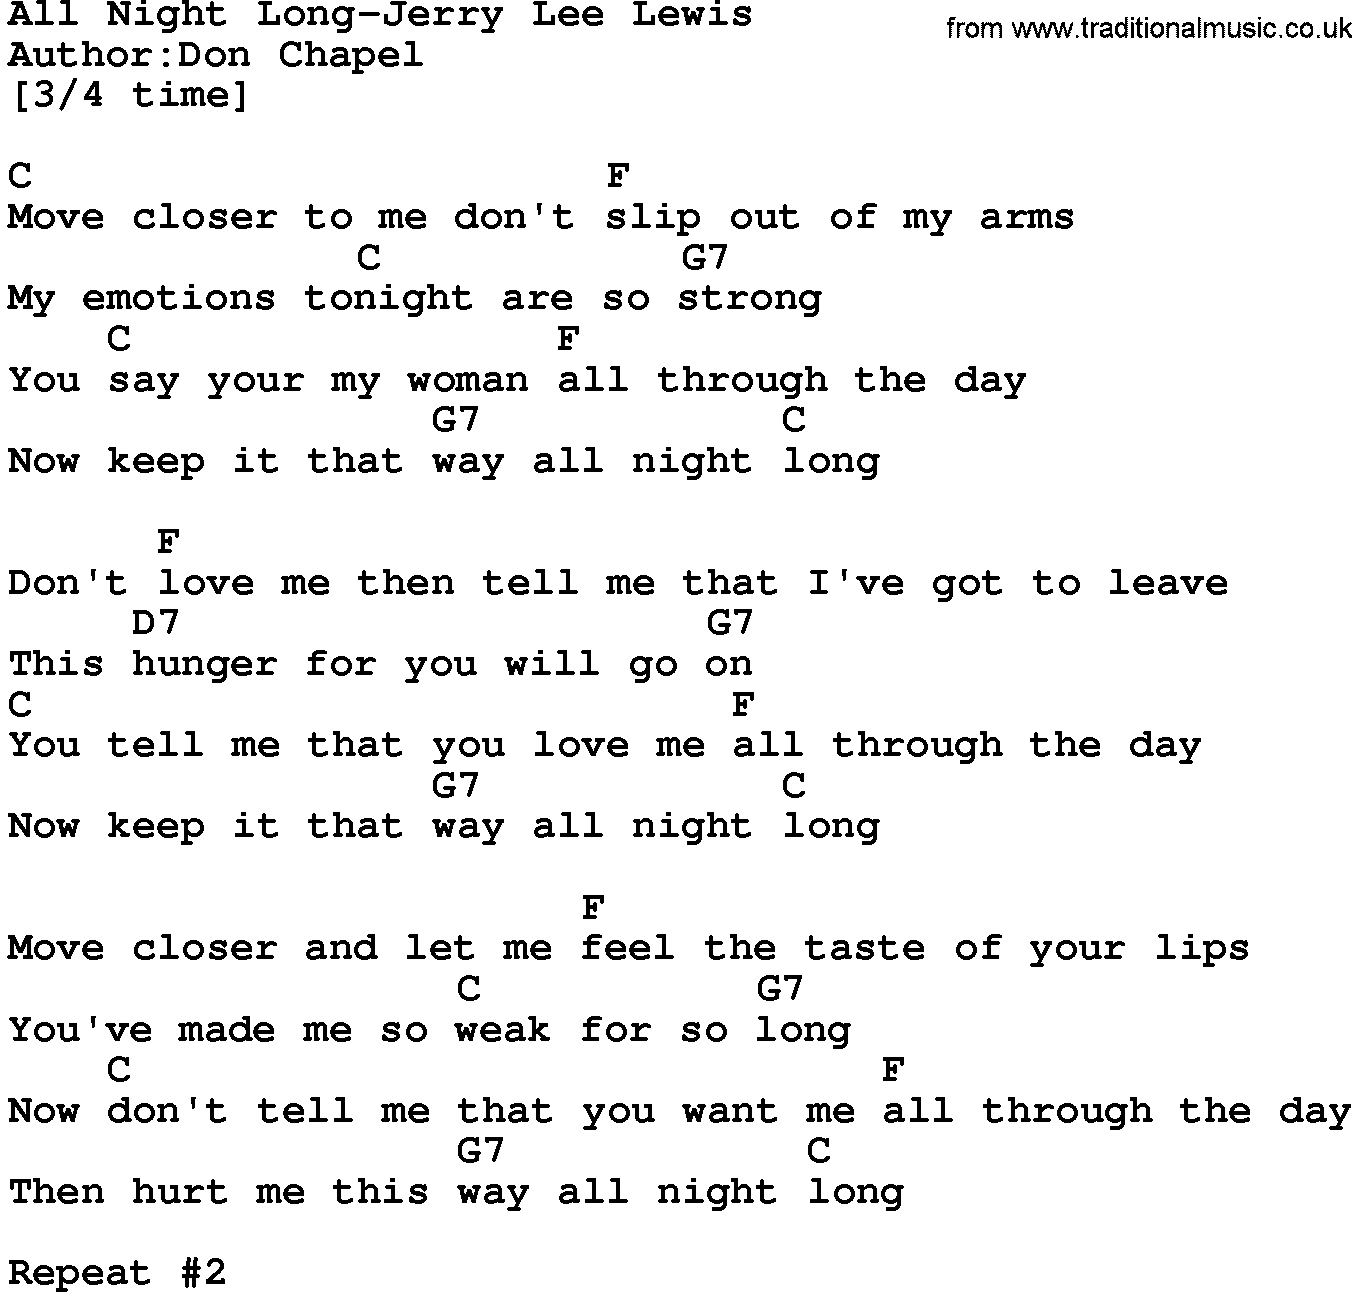 Country music song: All Night Long-Jerry Lee Lewis lyrics and chords